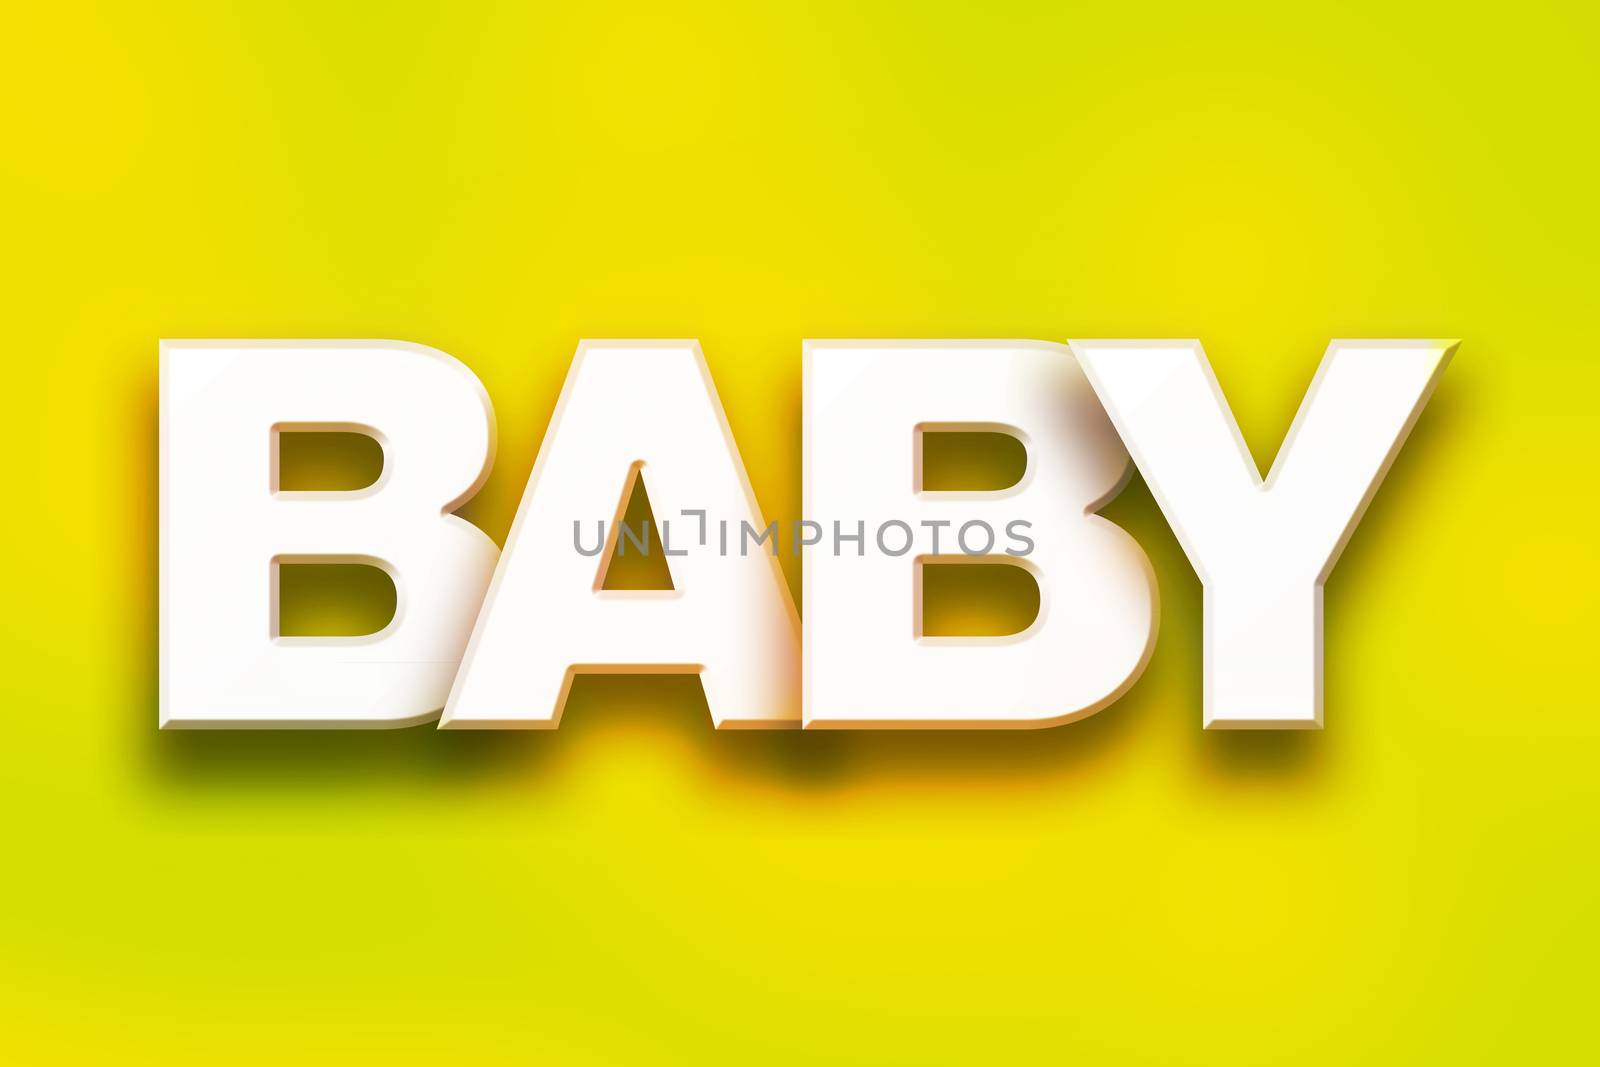 The word "Baby" written in white 3D letters on a colorful background concept and theme.